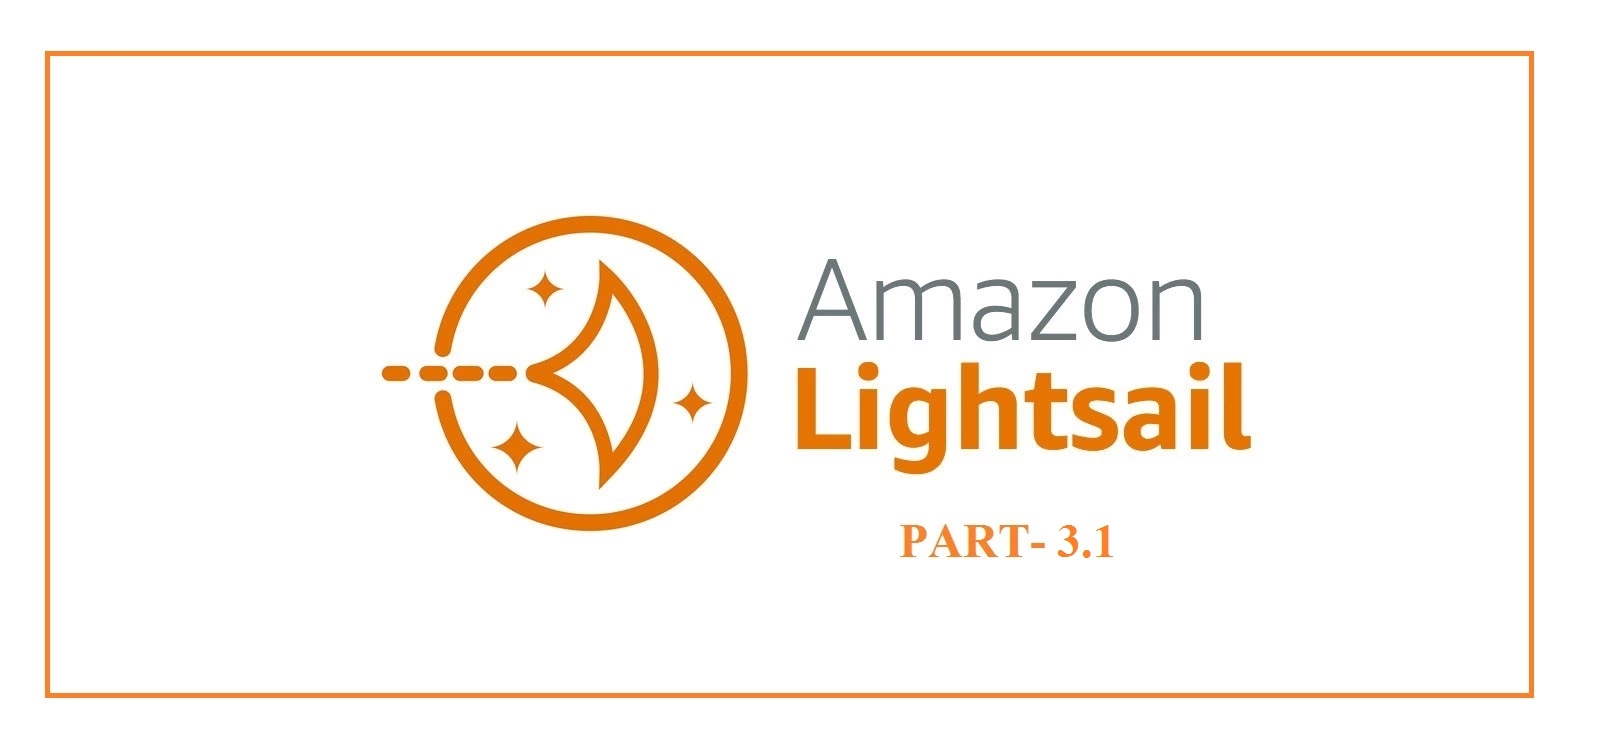 The Dynamic IP address of Instances in AWS Lightsail